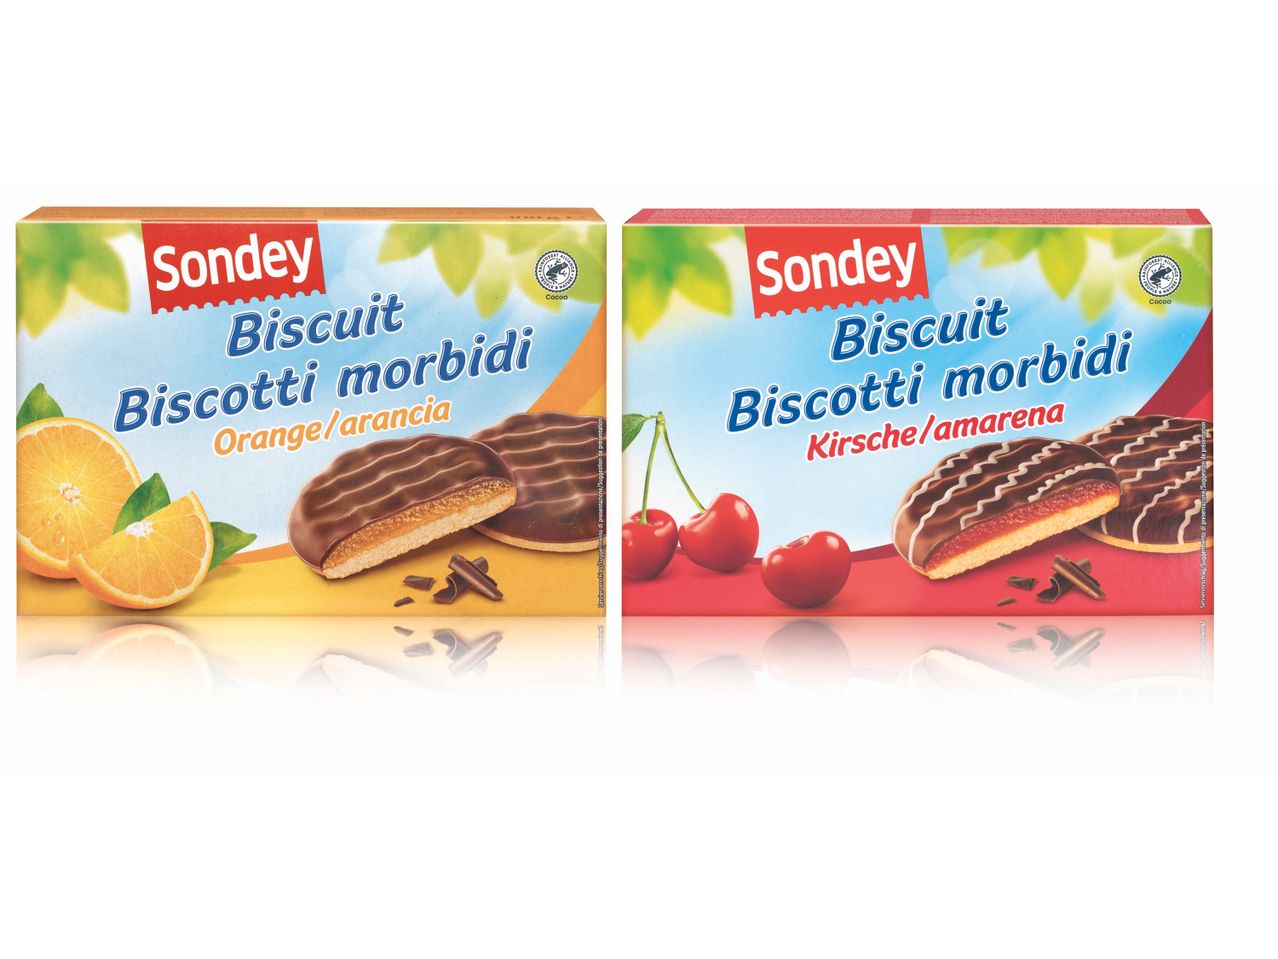 Go to full screen view: Soft Biscuits - Image 1